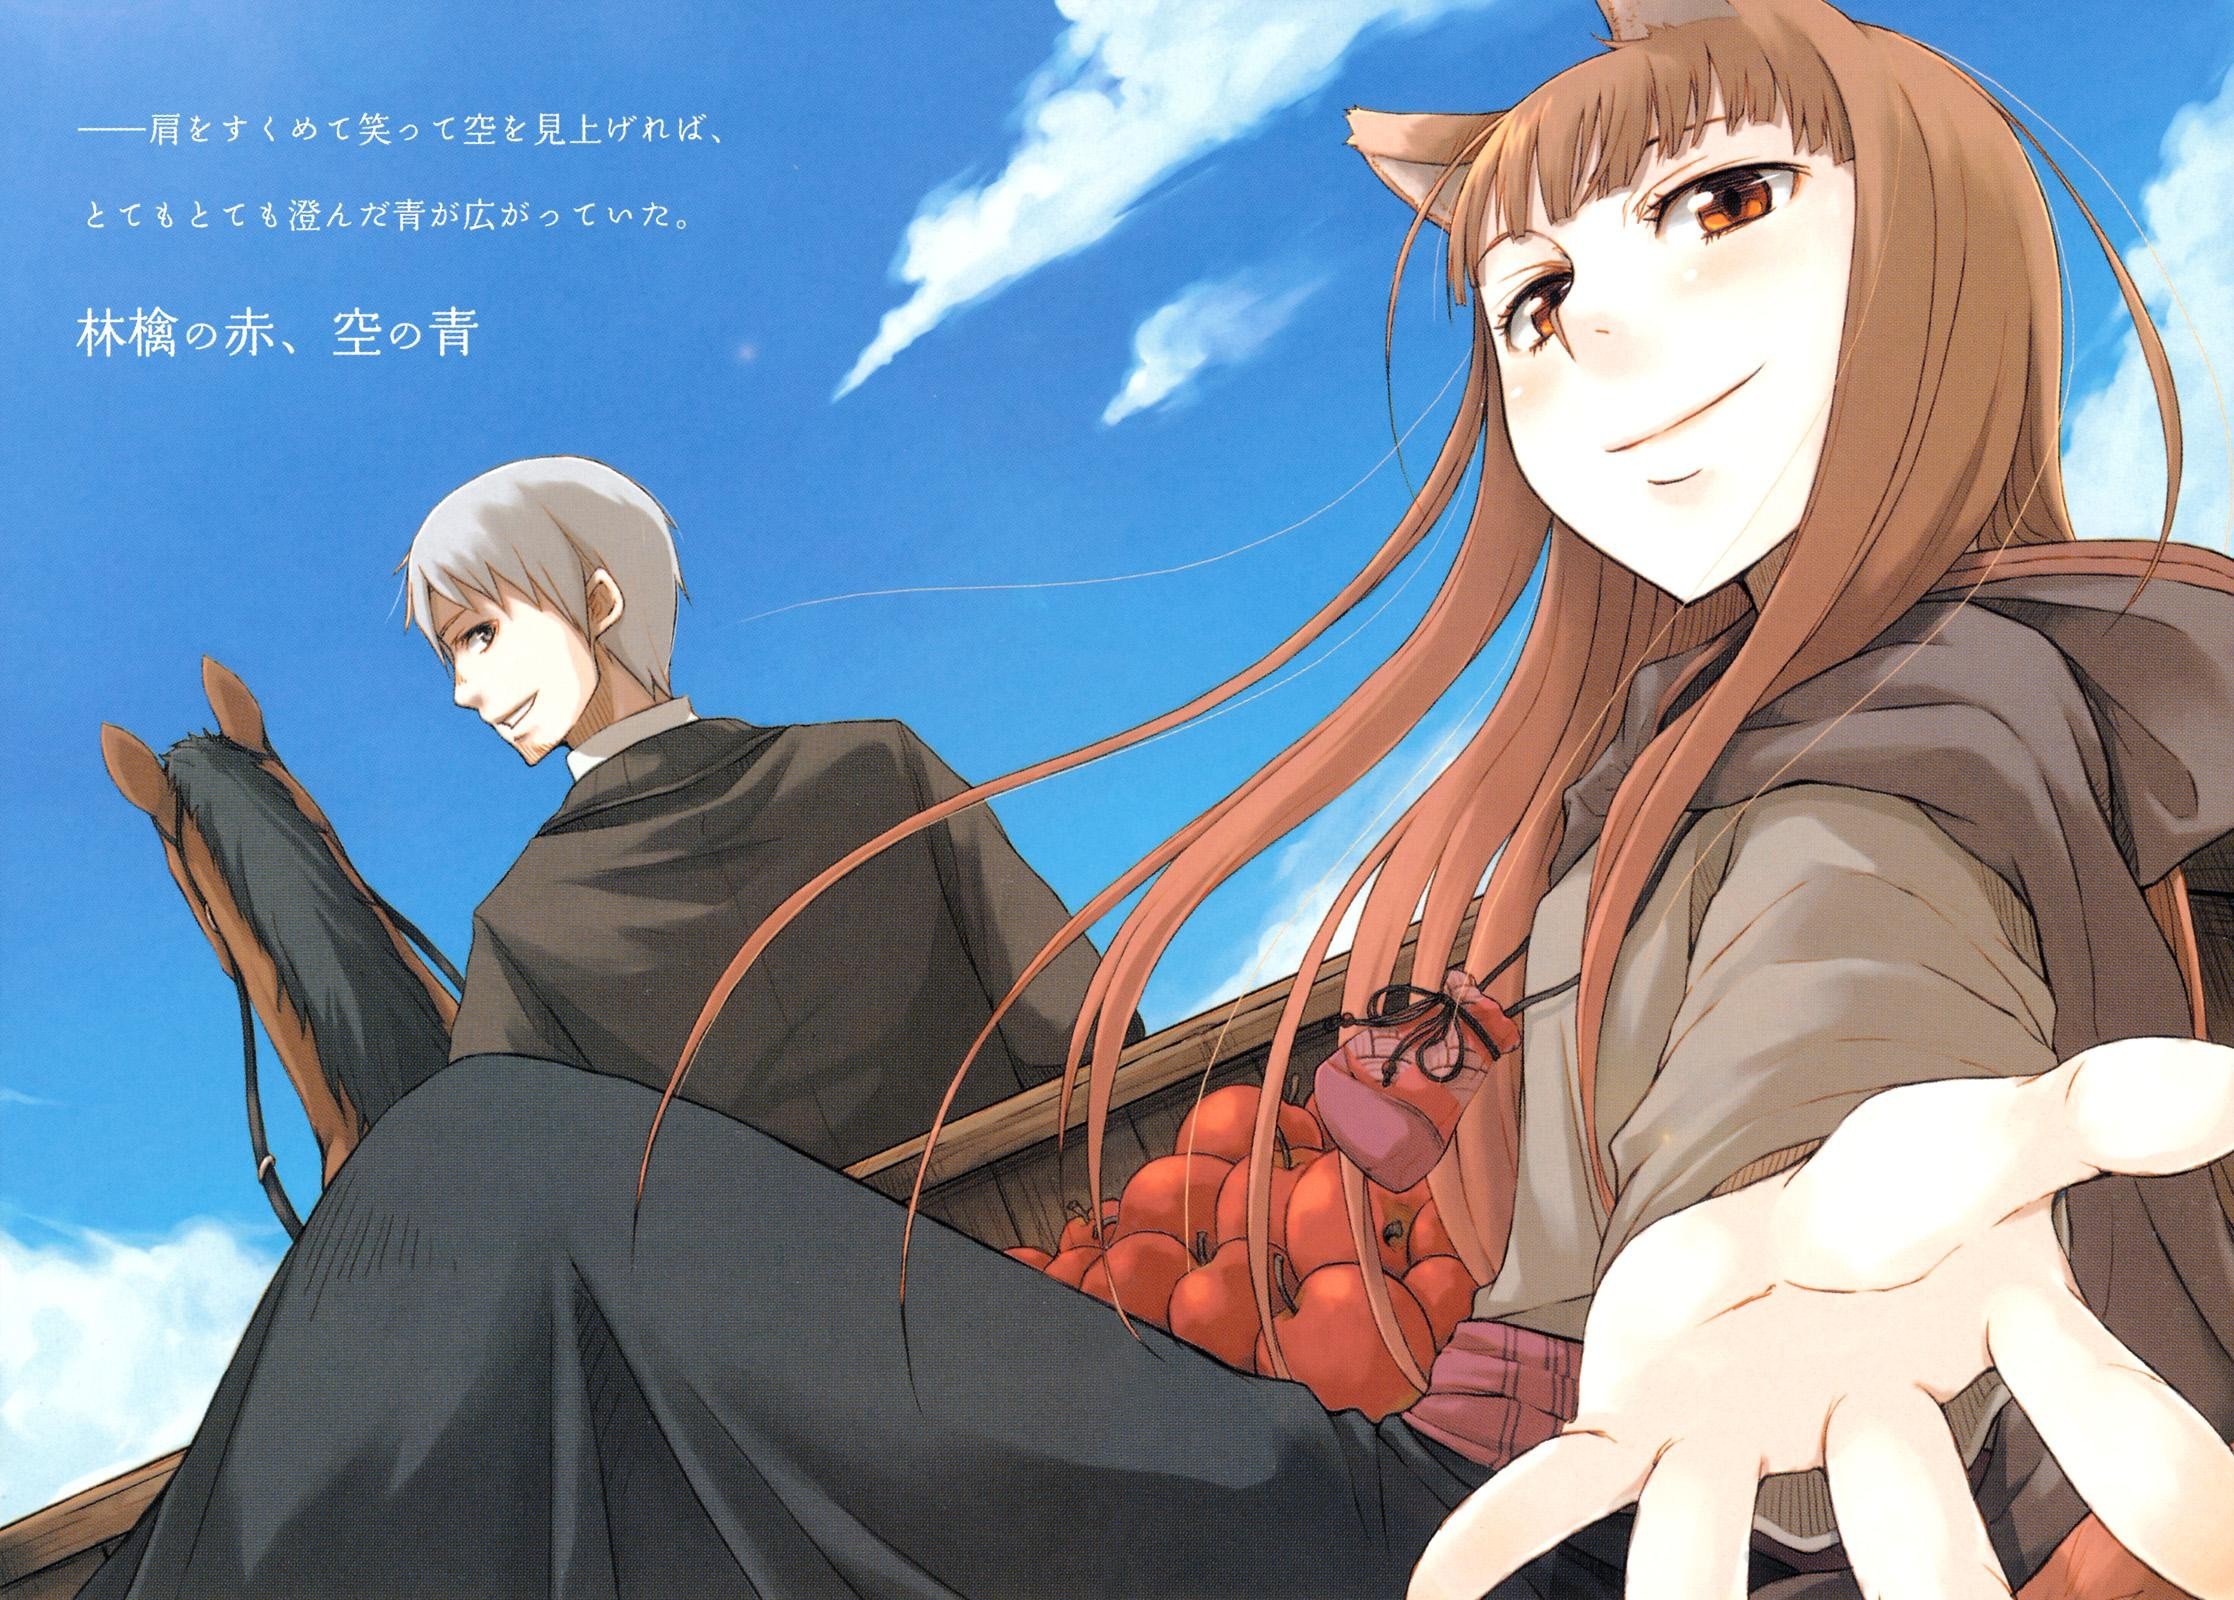 Lawrence Kraft, Spice and Wolf, Holo, Apples Wallpaper